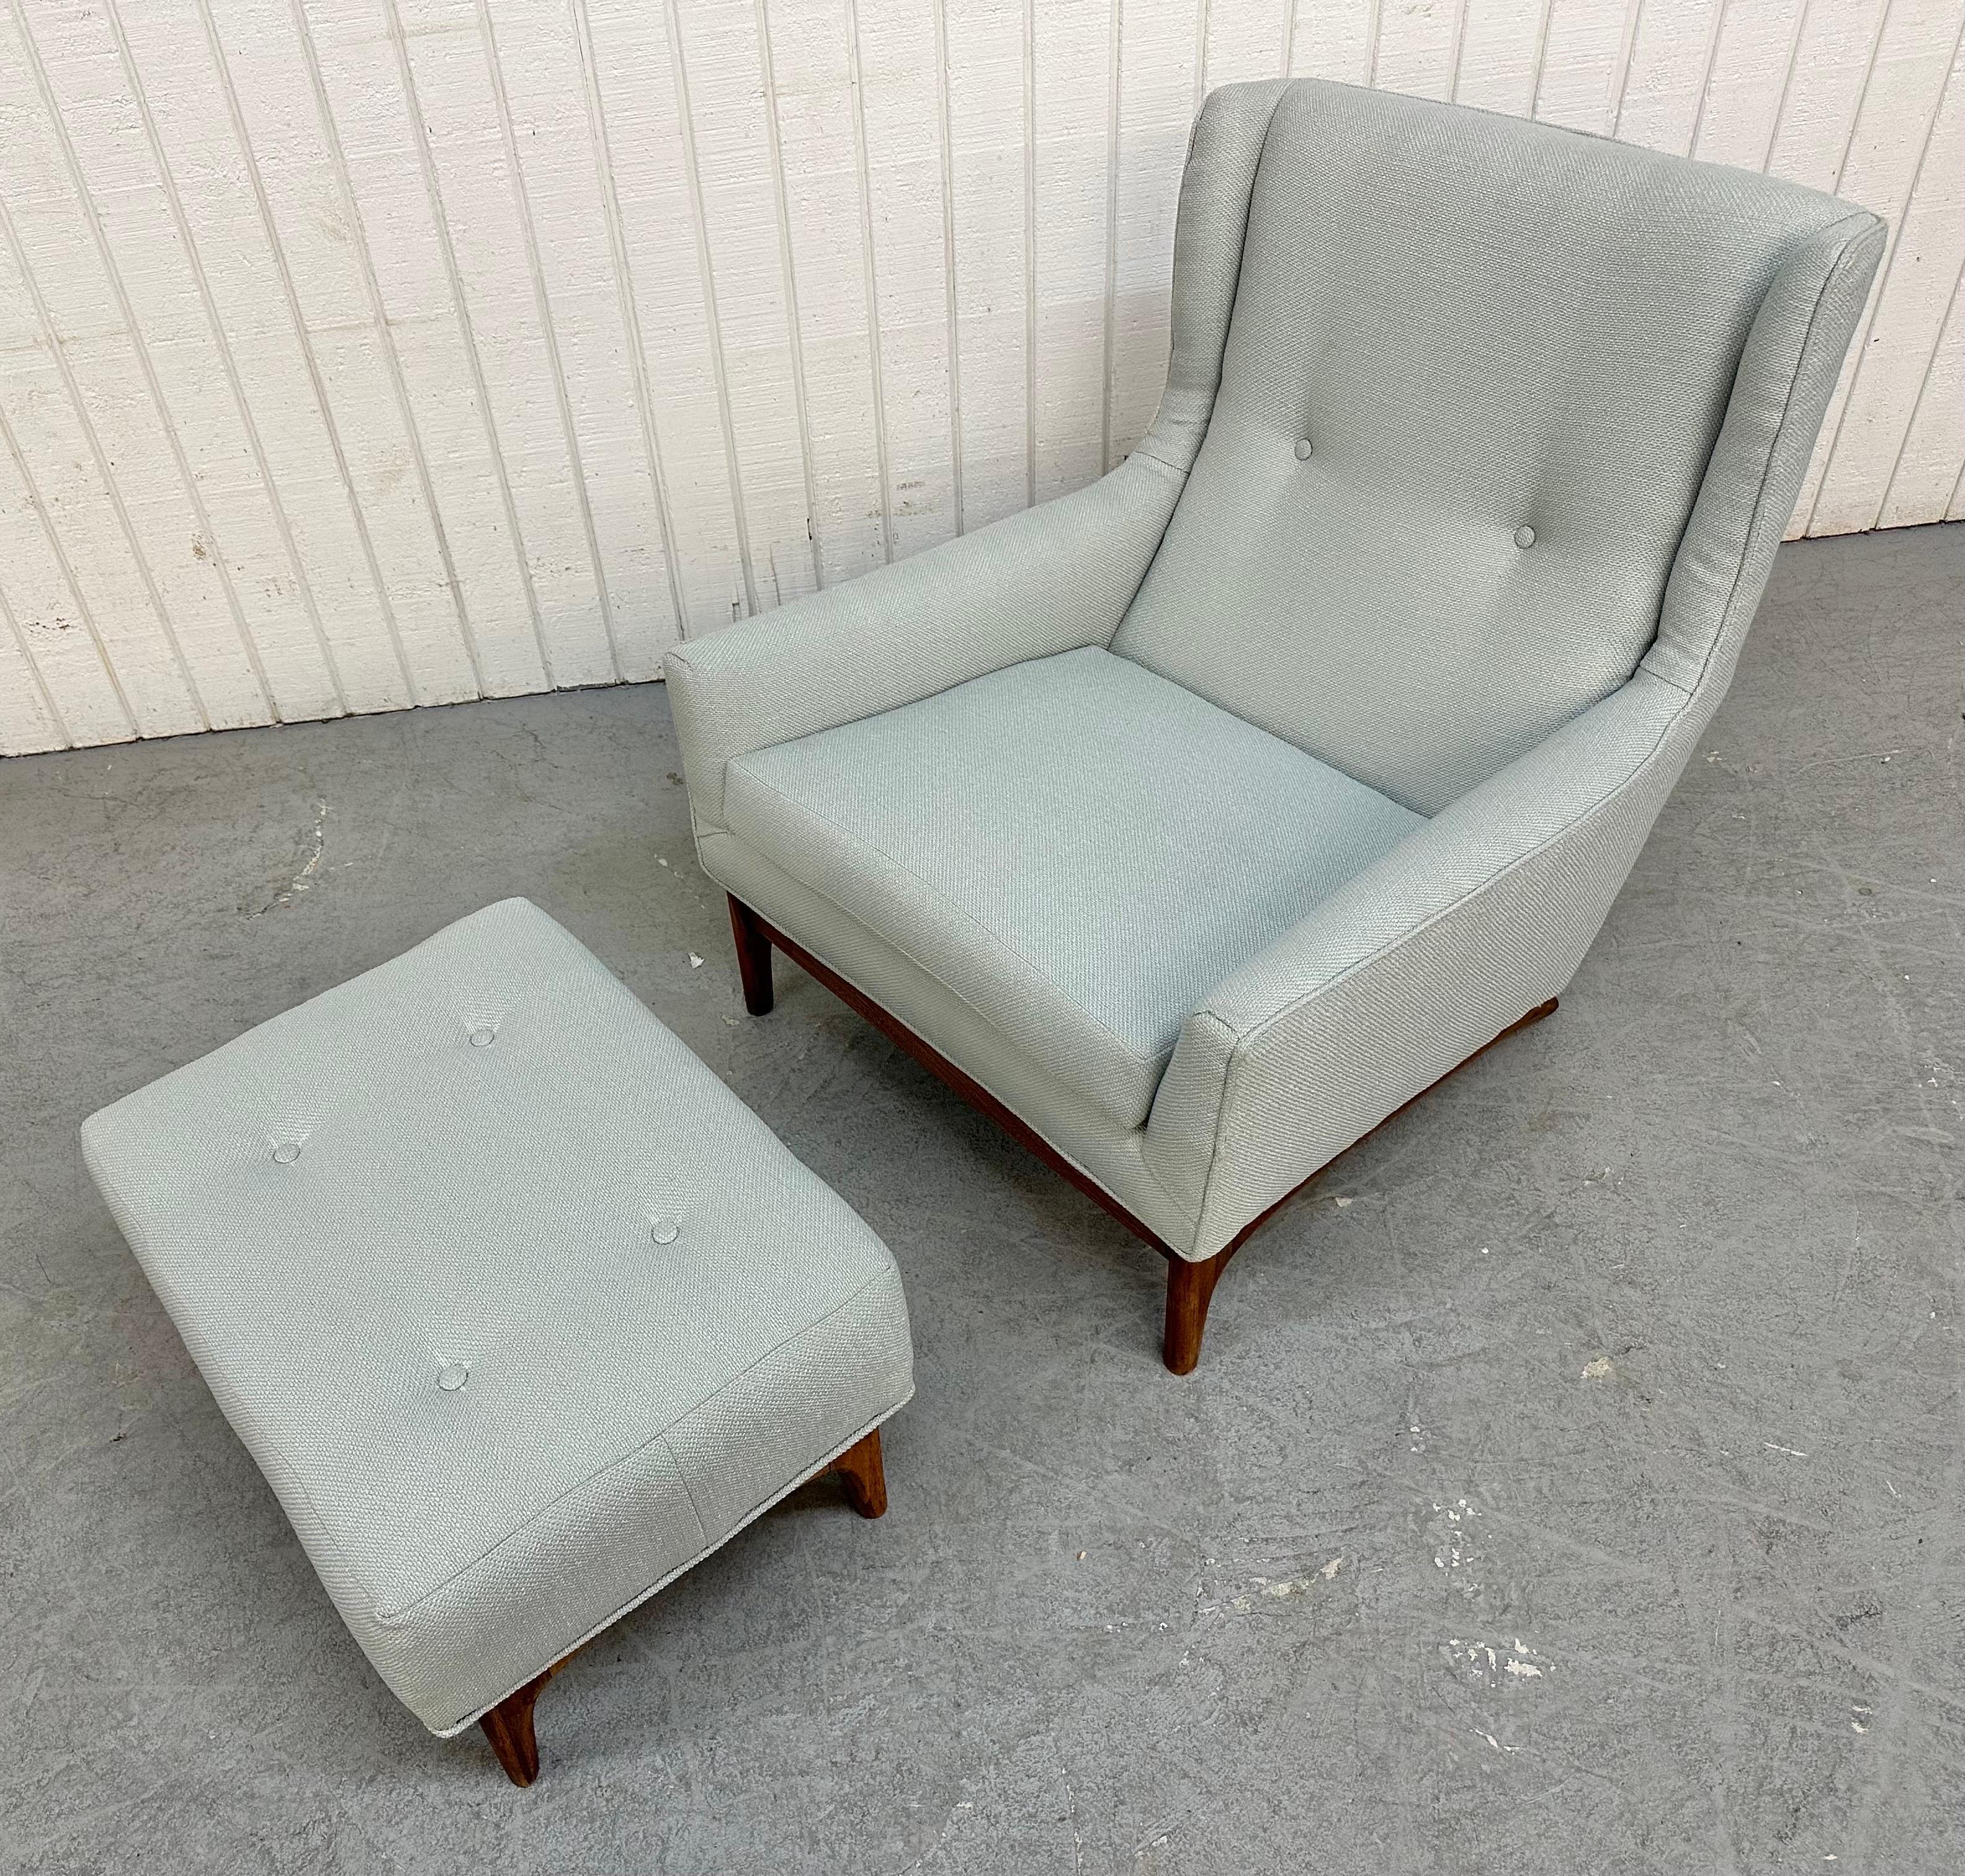 This listing is for a Mid-Century Modern Lounge Chair & Ottoman. Featuring an chair chair with matching ottoman, walnut legs, removable cushion, and new light gray upholstery. This is an exceptional combination of quality and design.